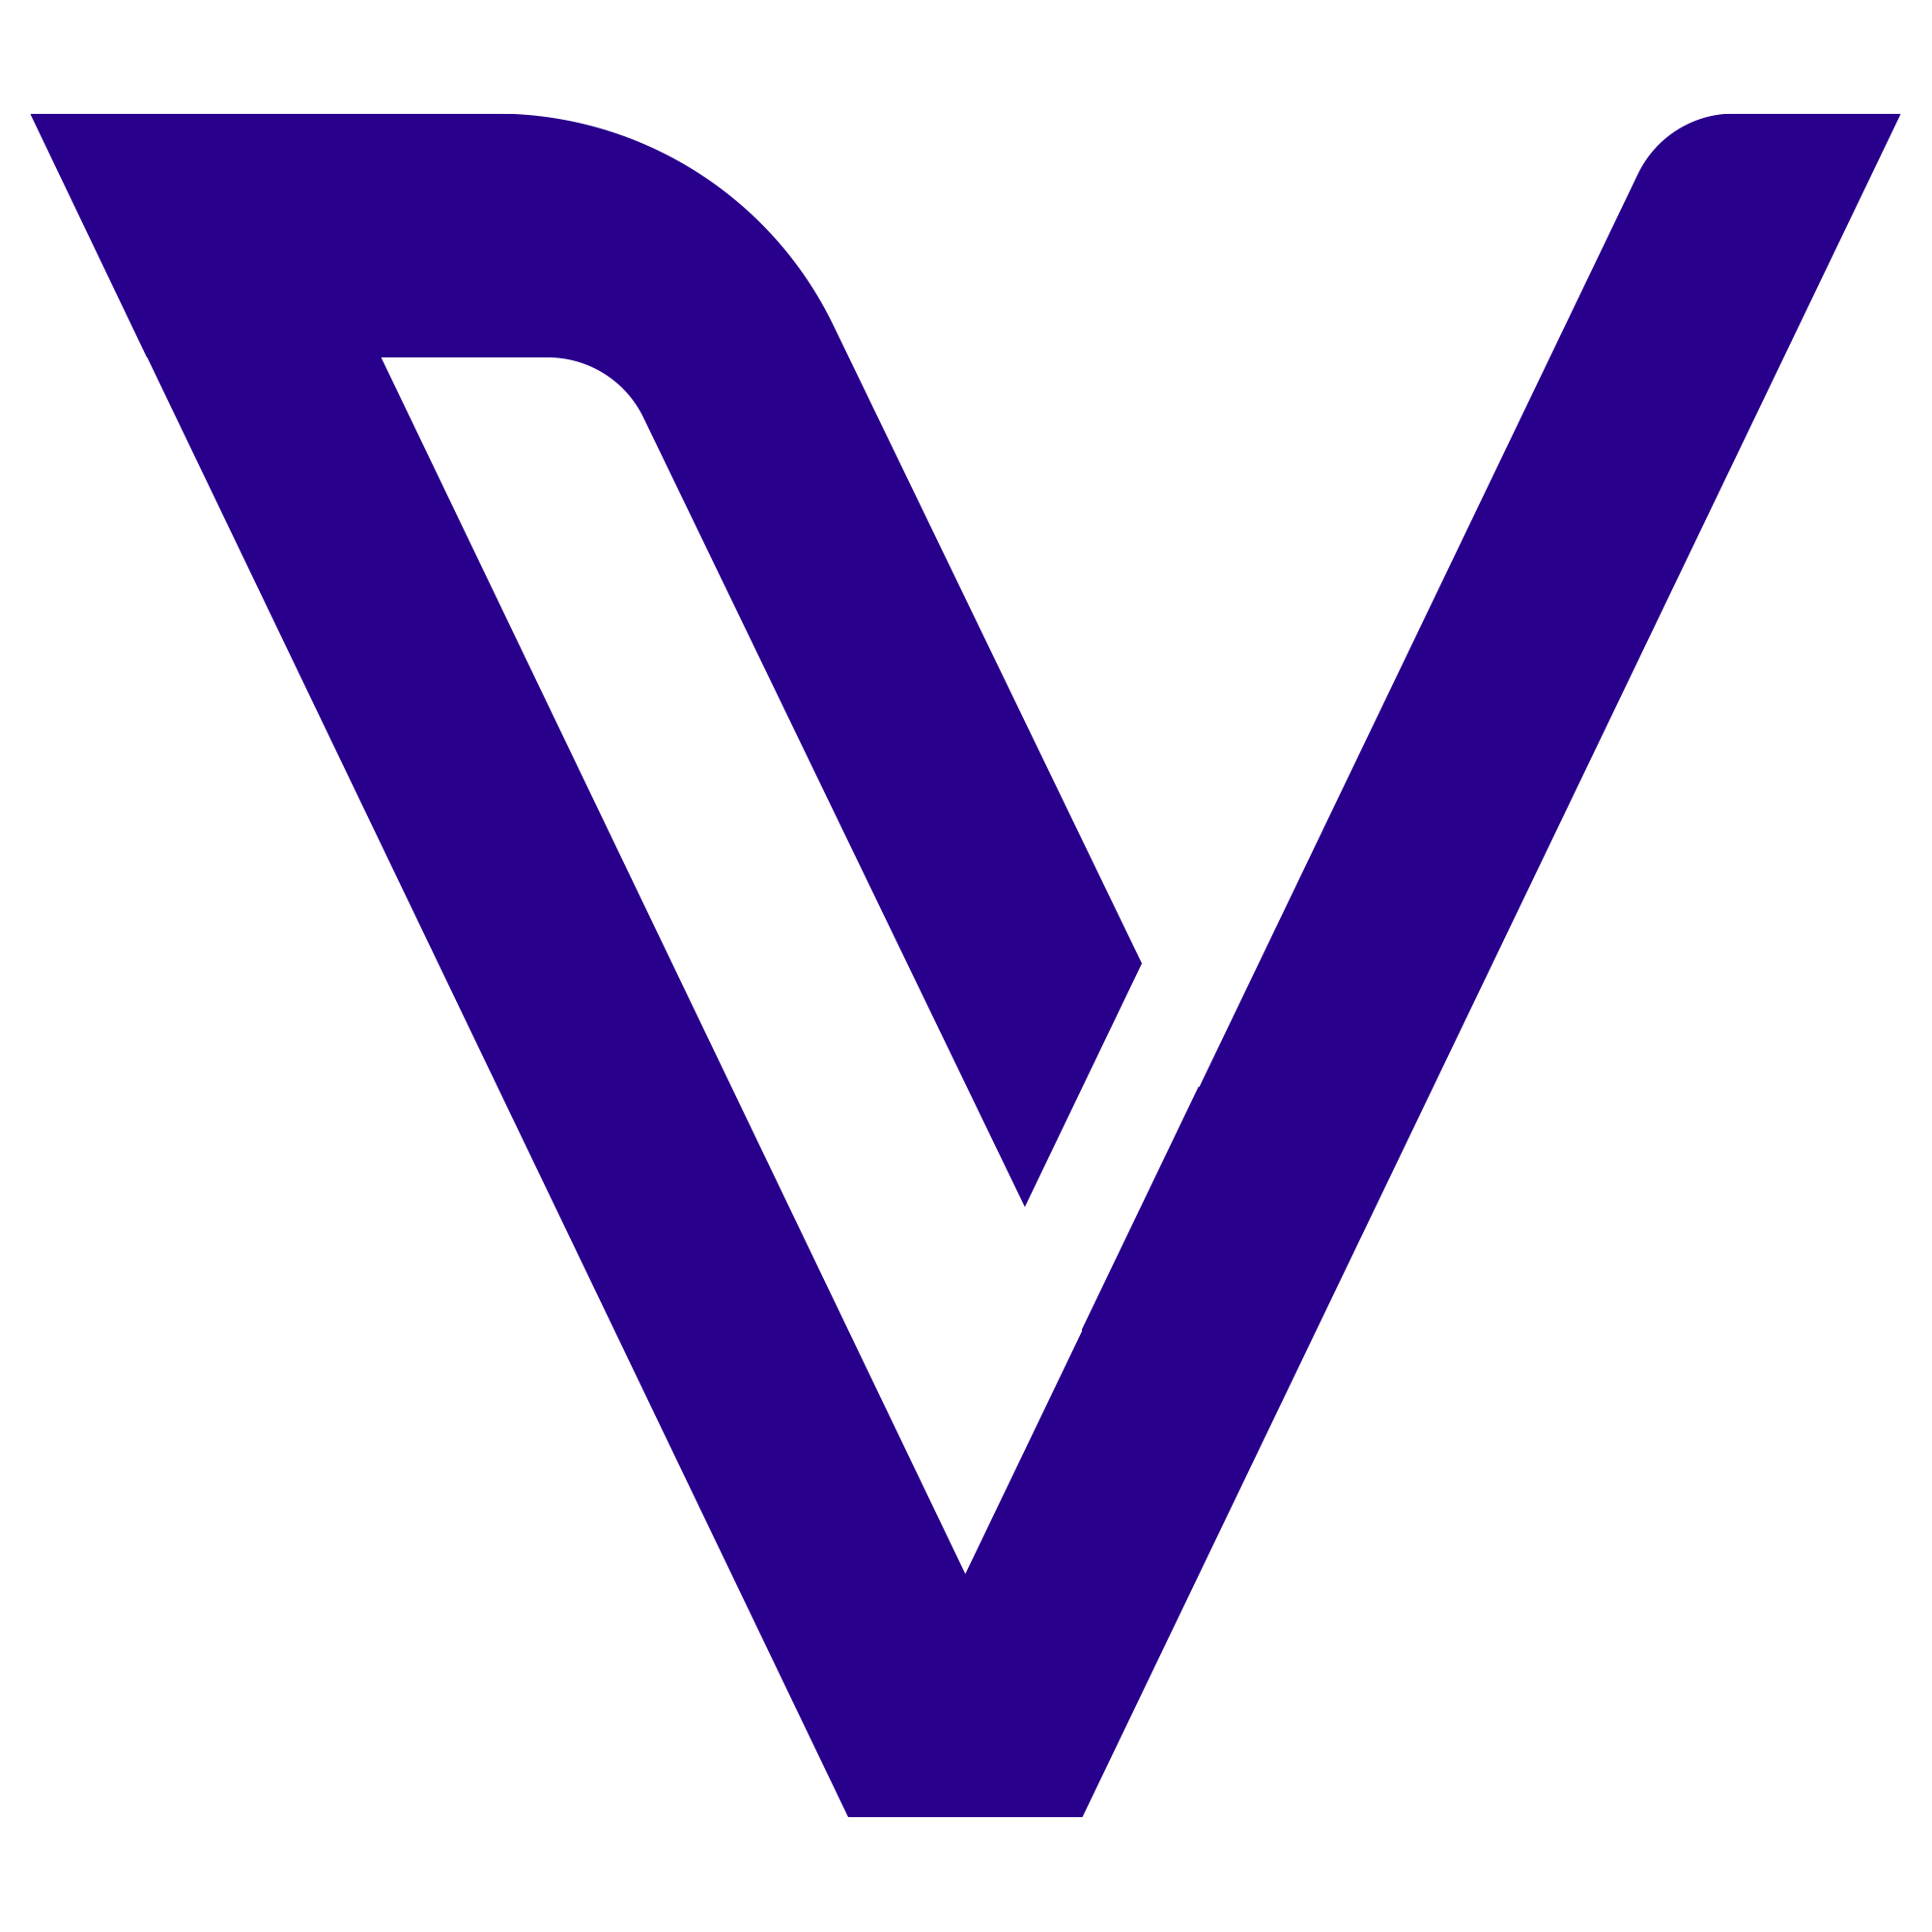 How to Trade Vechain - Guide to Buying and Selling VET Tokens | Coin Guru